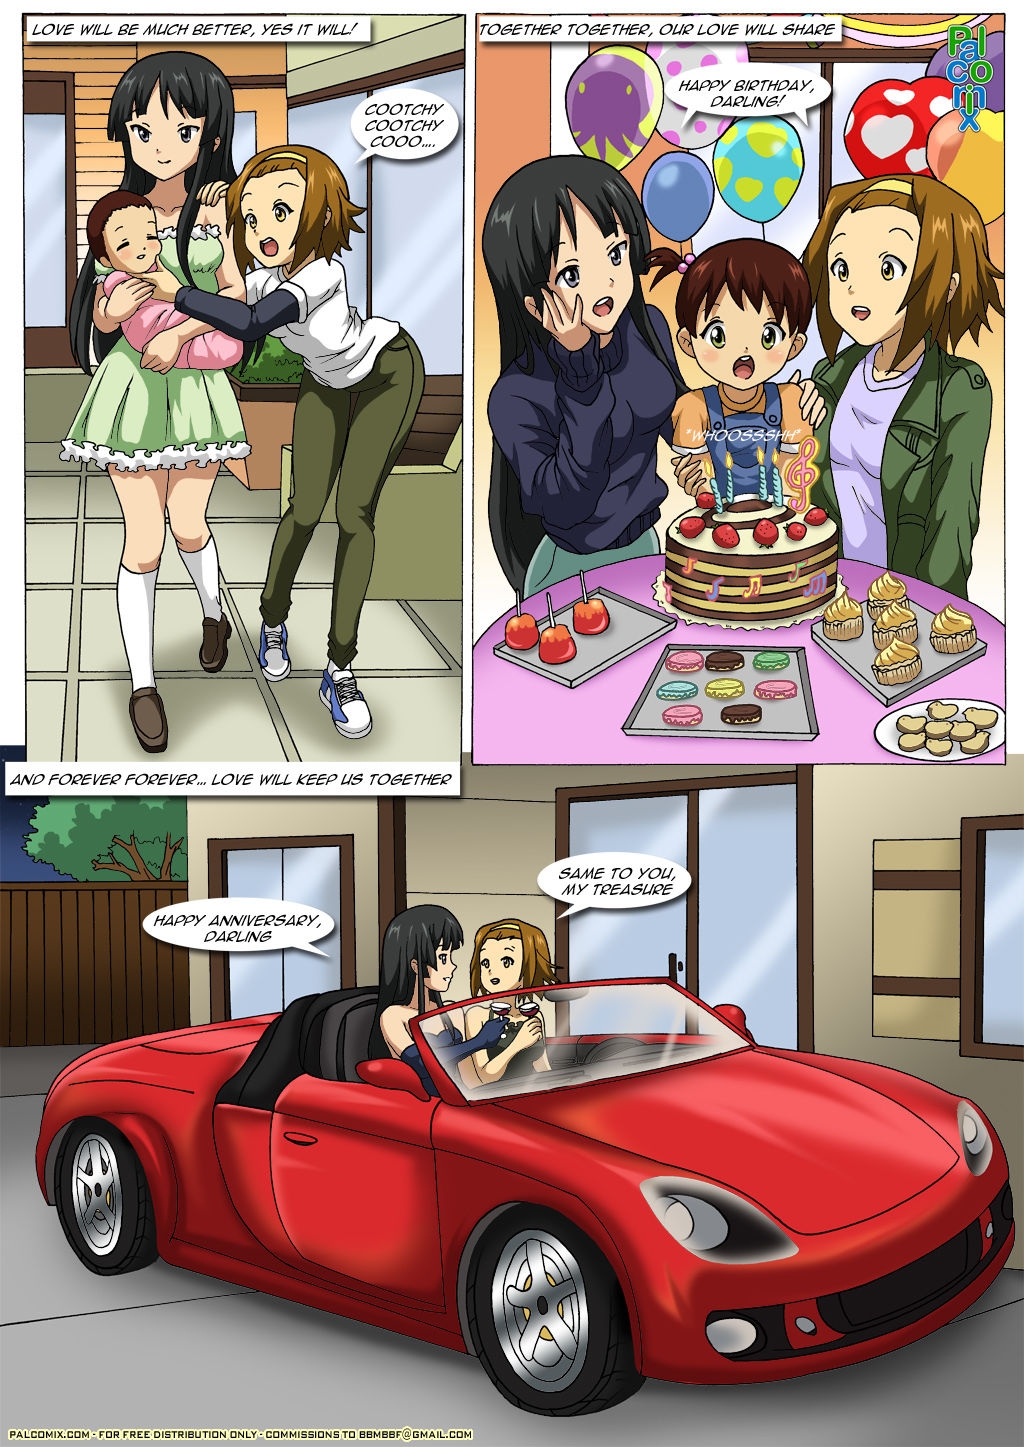 (Palcomix) On This Day... (K-ON!) 5